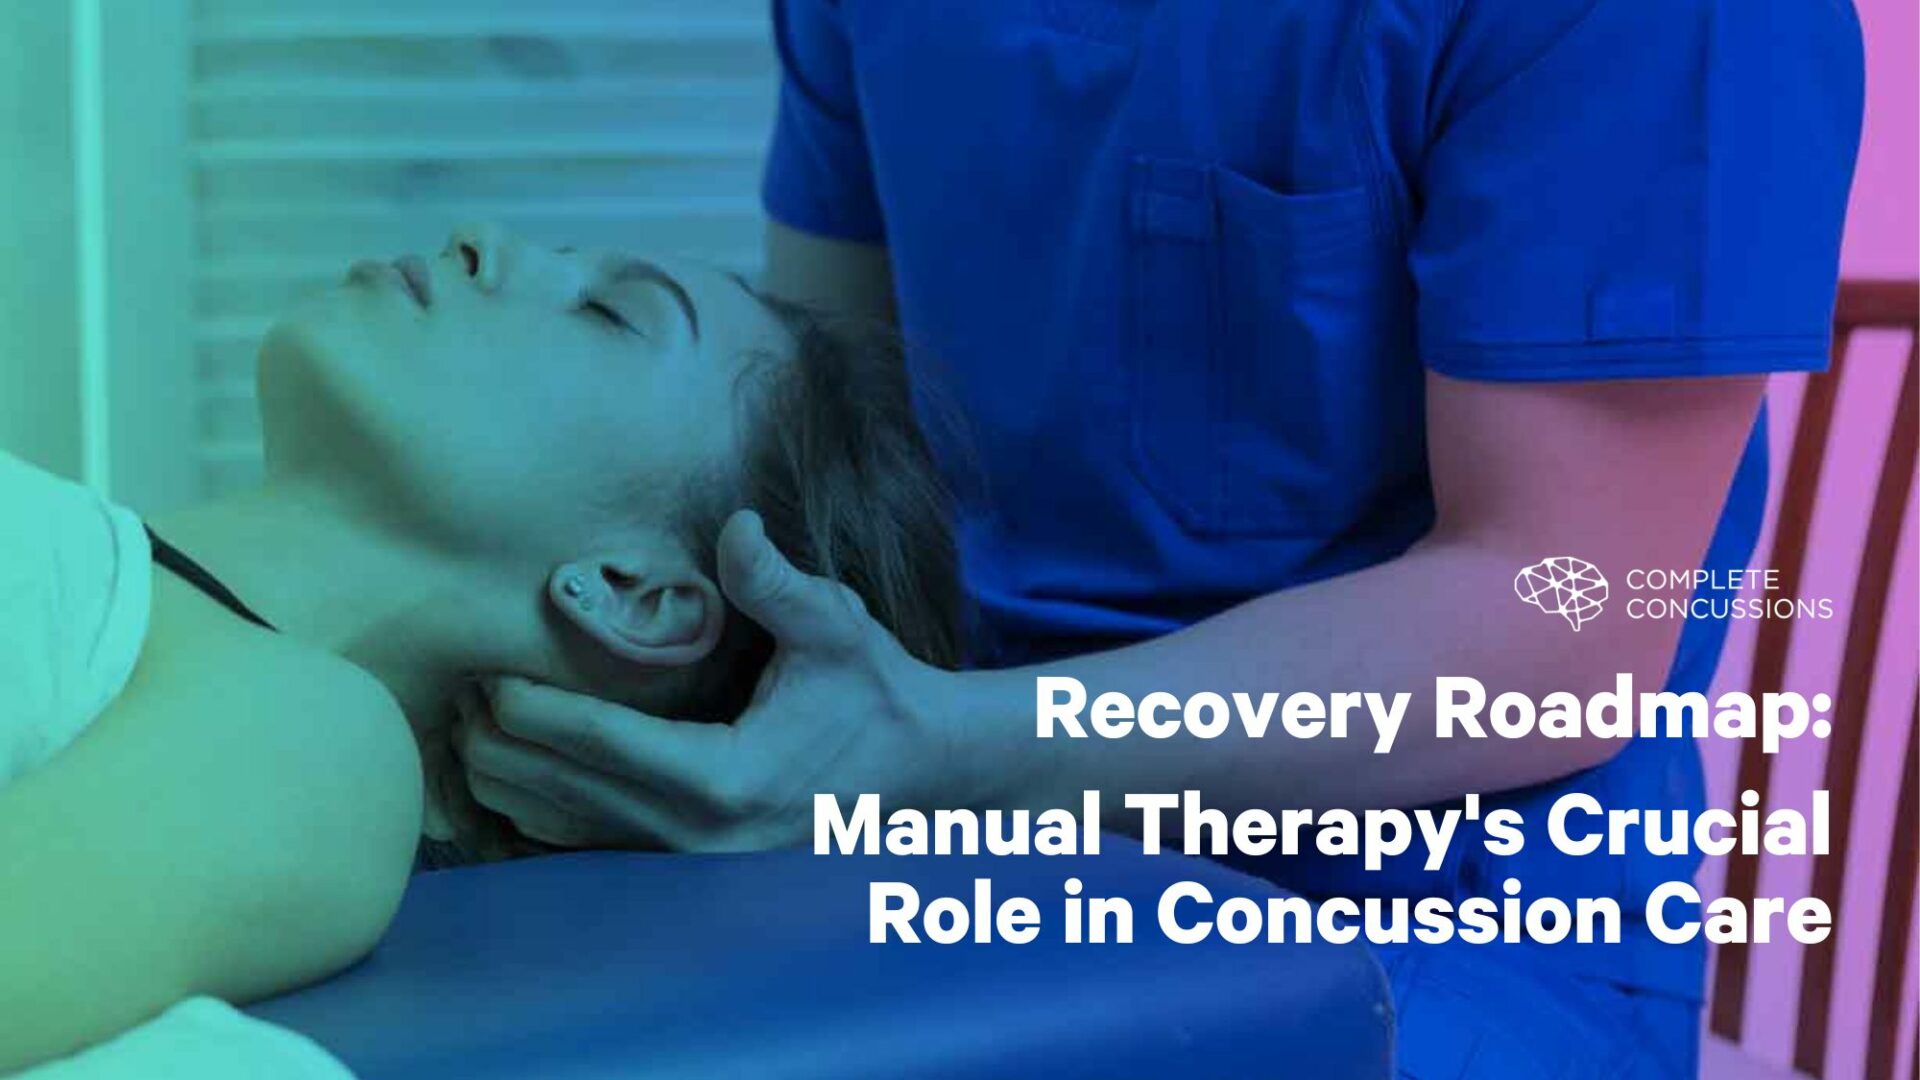 Recovery Roadmap: Manual Therapy’s Crucial Role in Concussion Care